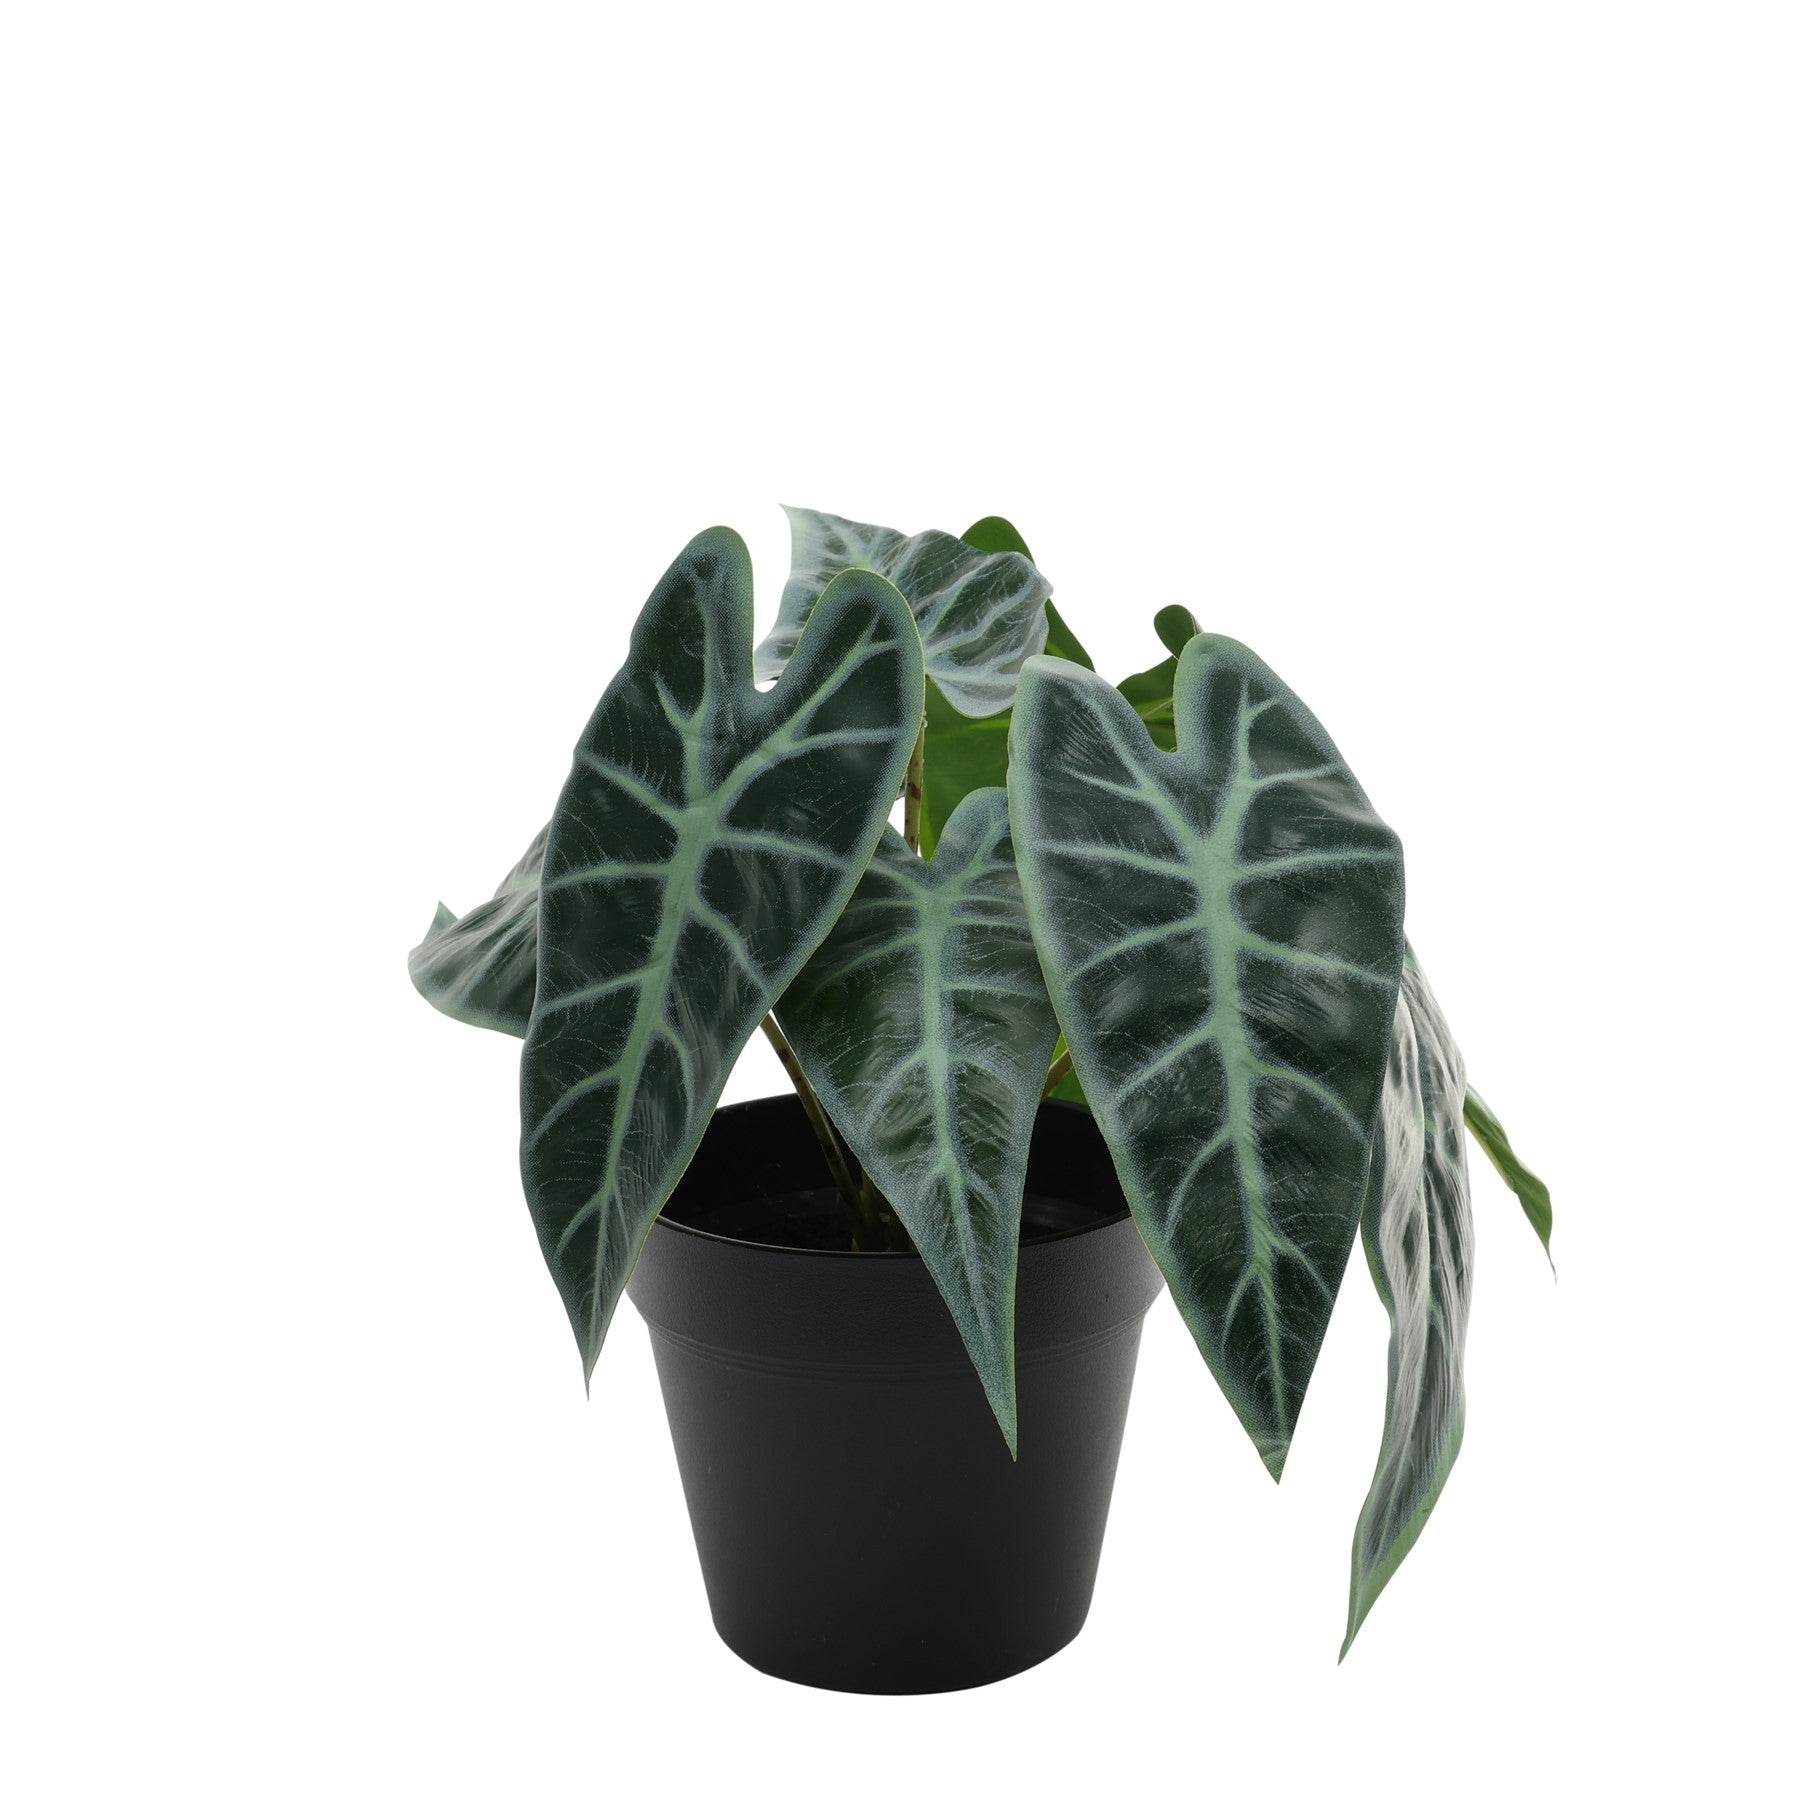 View Caladium Potted House Plant 23cm information